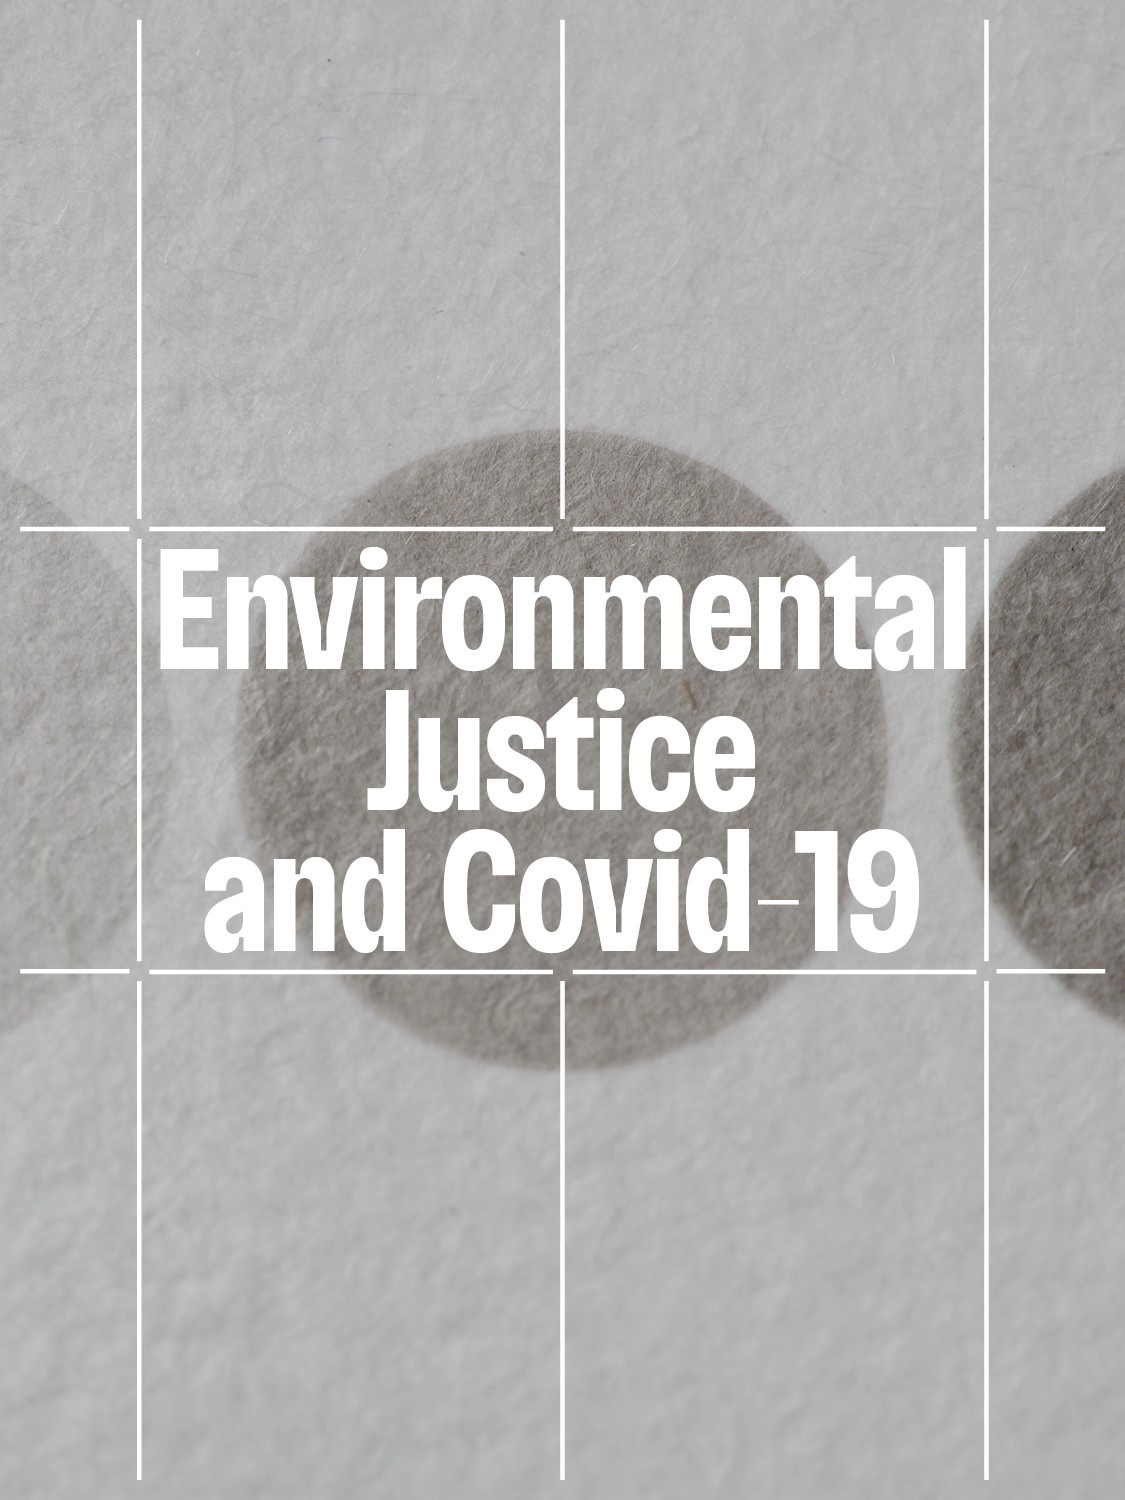 The event title "Environmental Justice and Covid-19" overlaid on an image of three gray dots on a grainy piece of paper. The dots vary from light to darker gray.